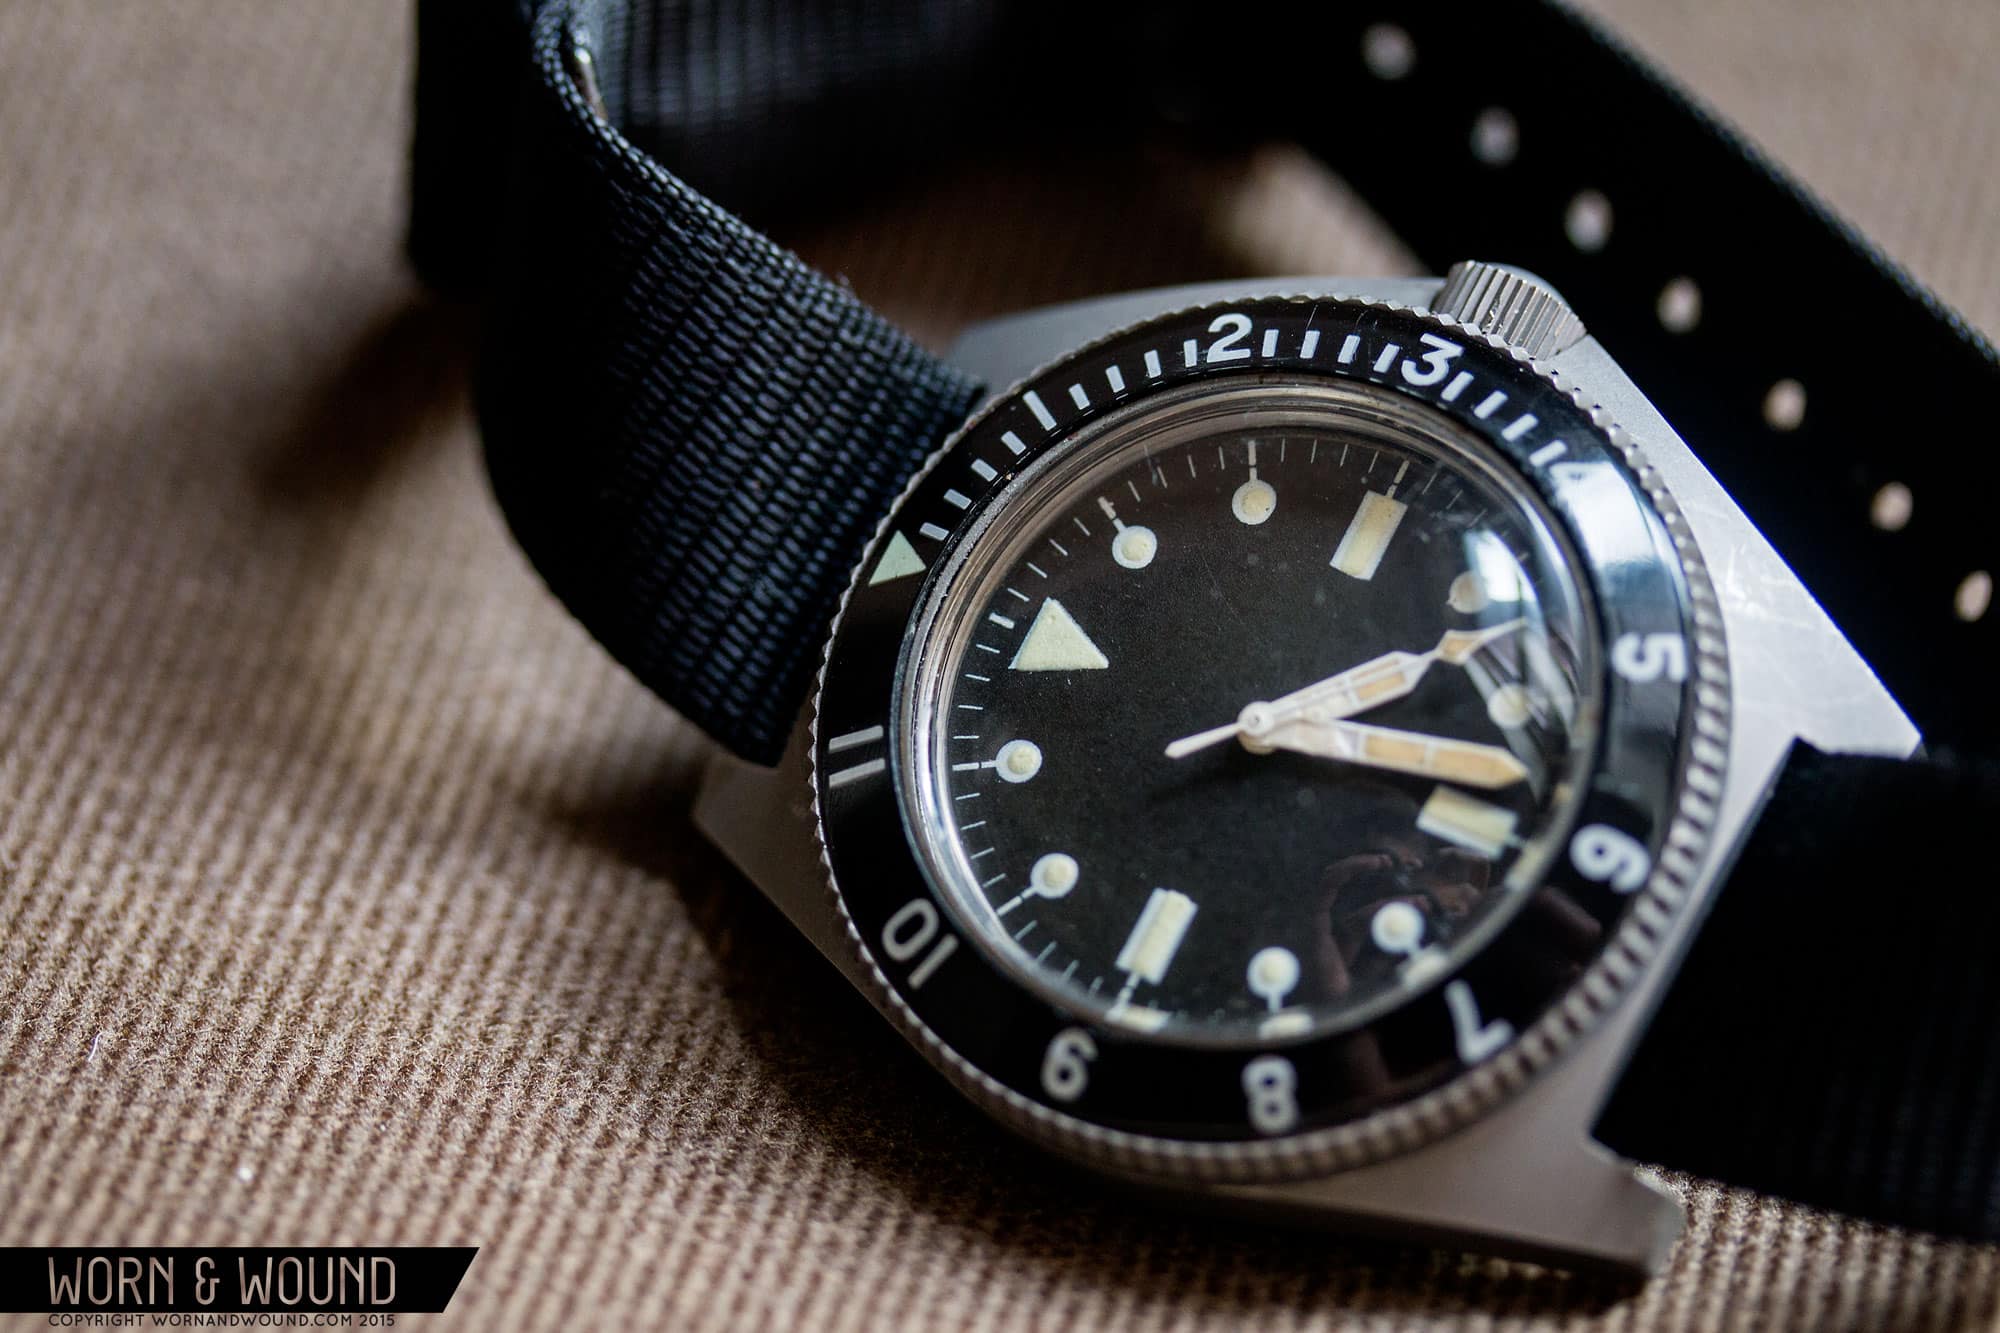 Watches, Stories, and Gear: A First Look at Dune, the Longest Creature in the Ocean, and a Luxurious Scrabble Board